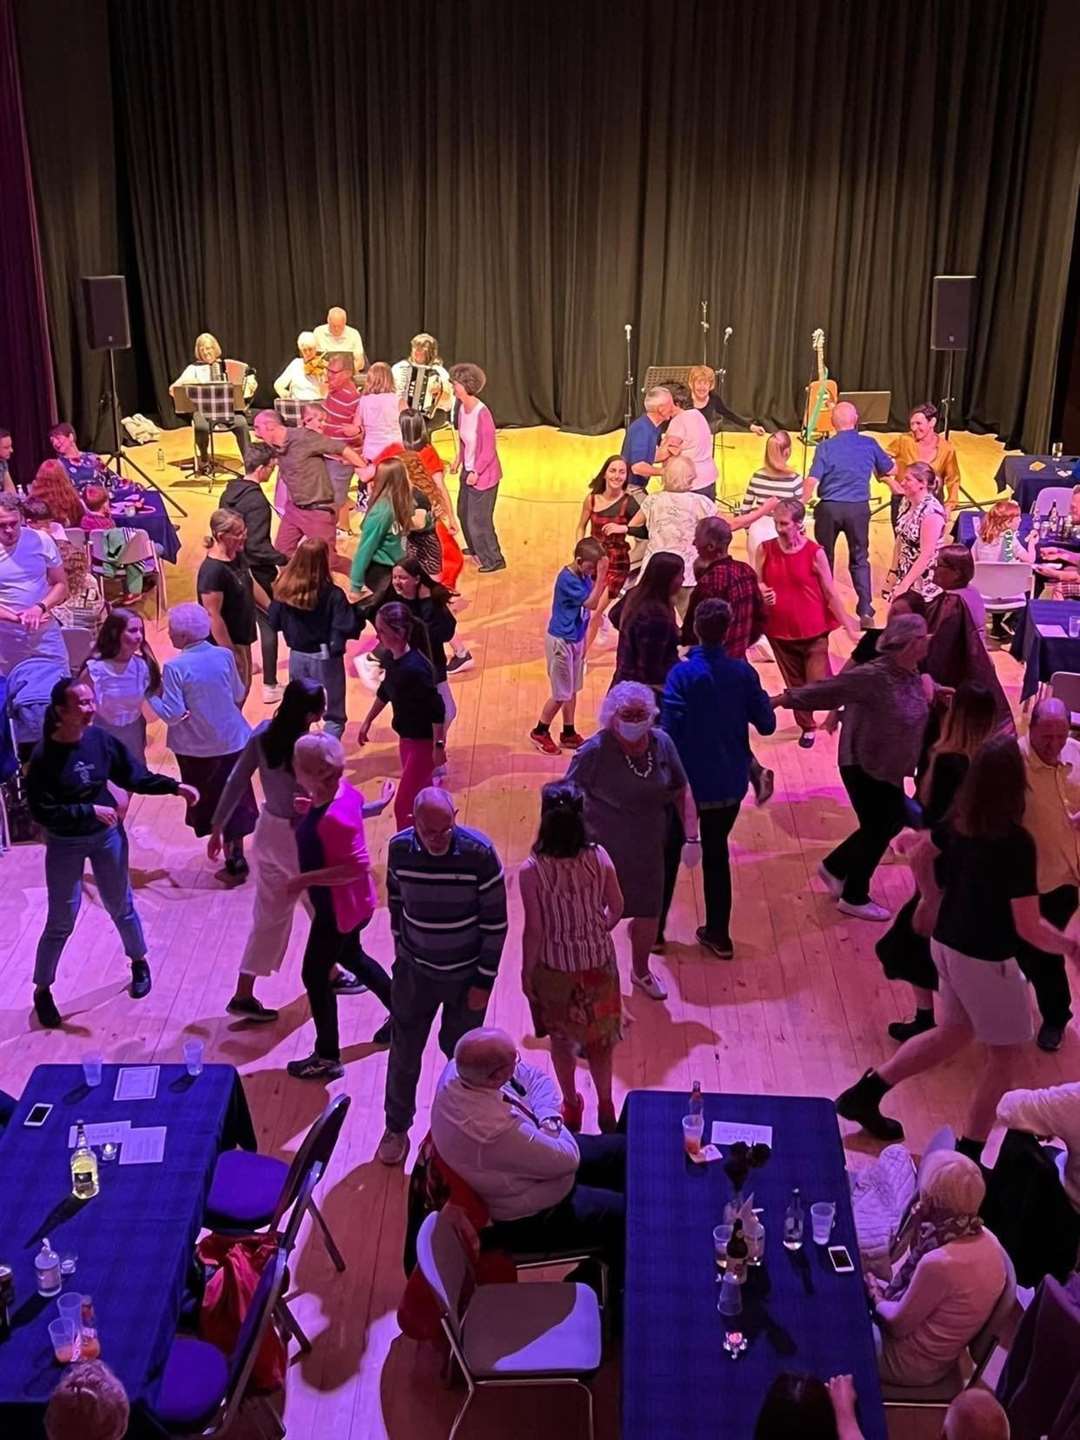 A ceilidh will entertain folk in Tain early next month.